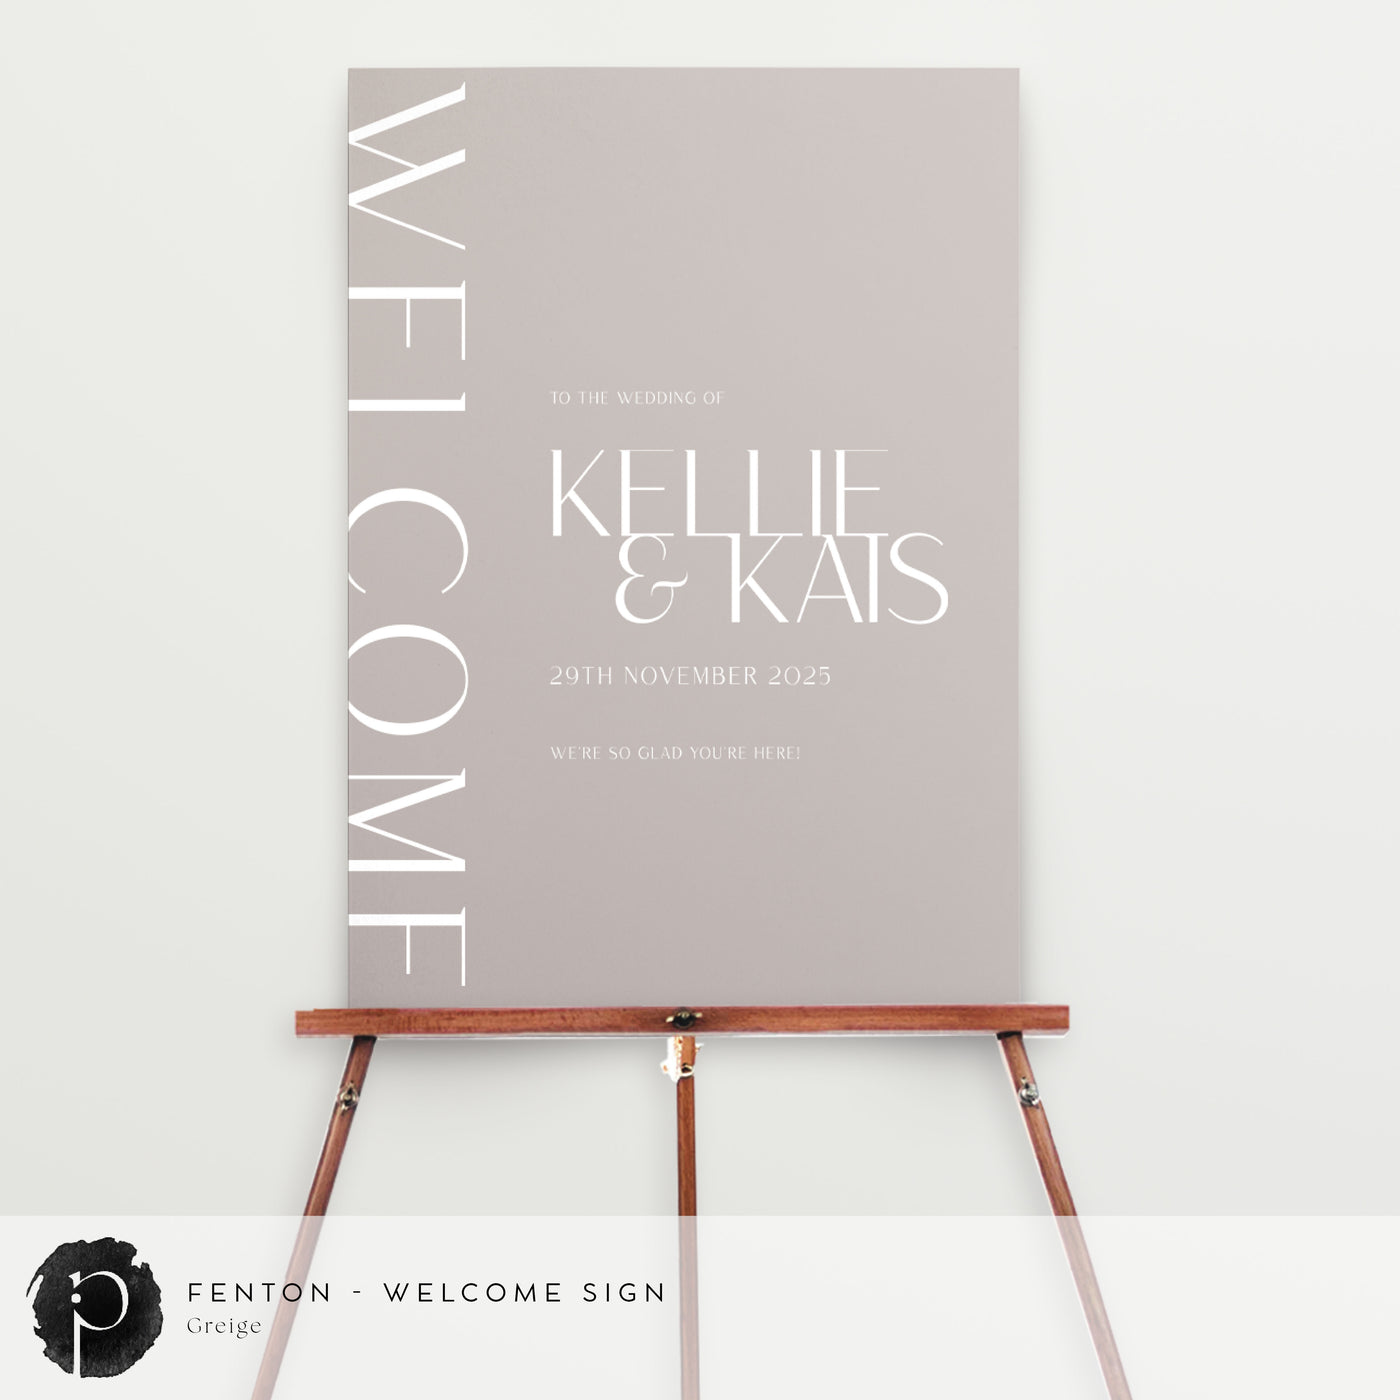 Fenton - Welcome Sign